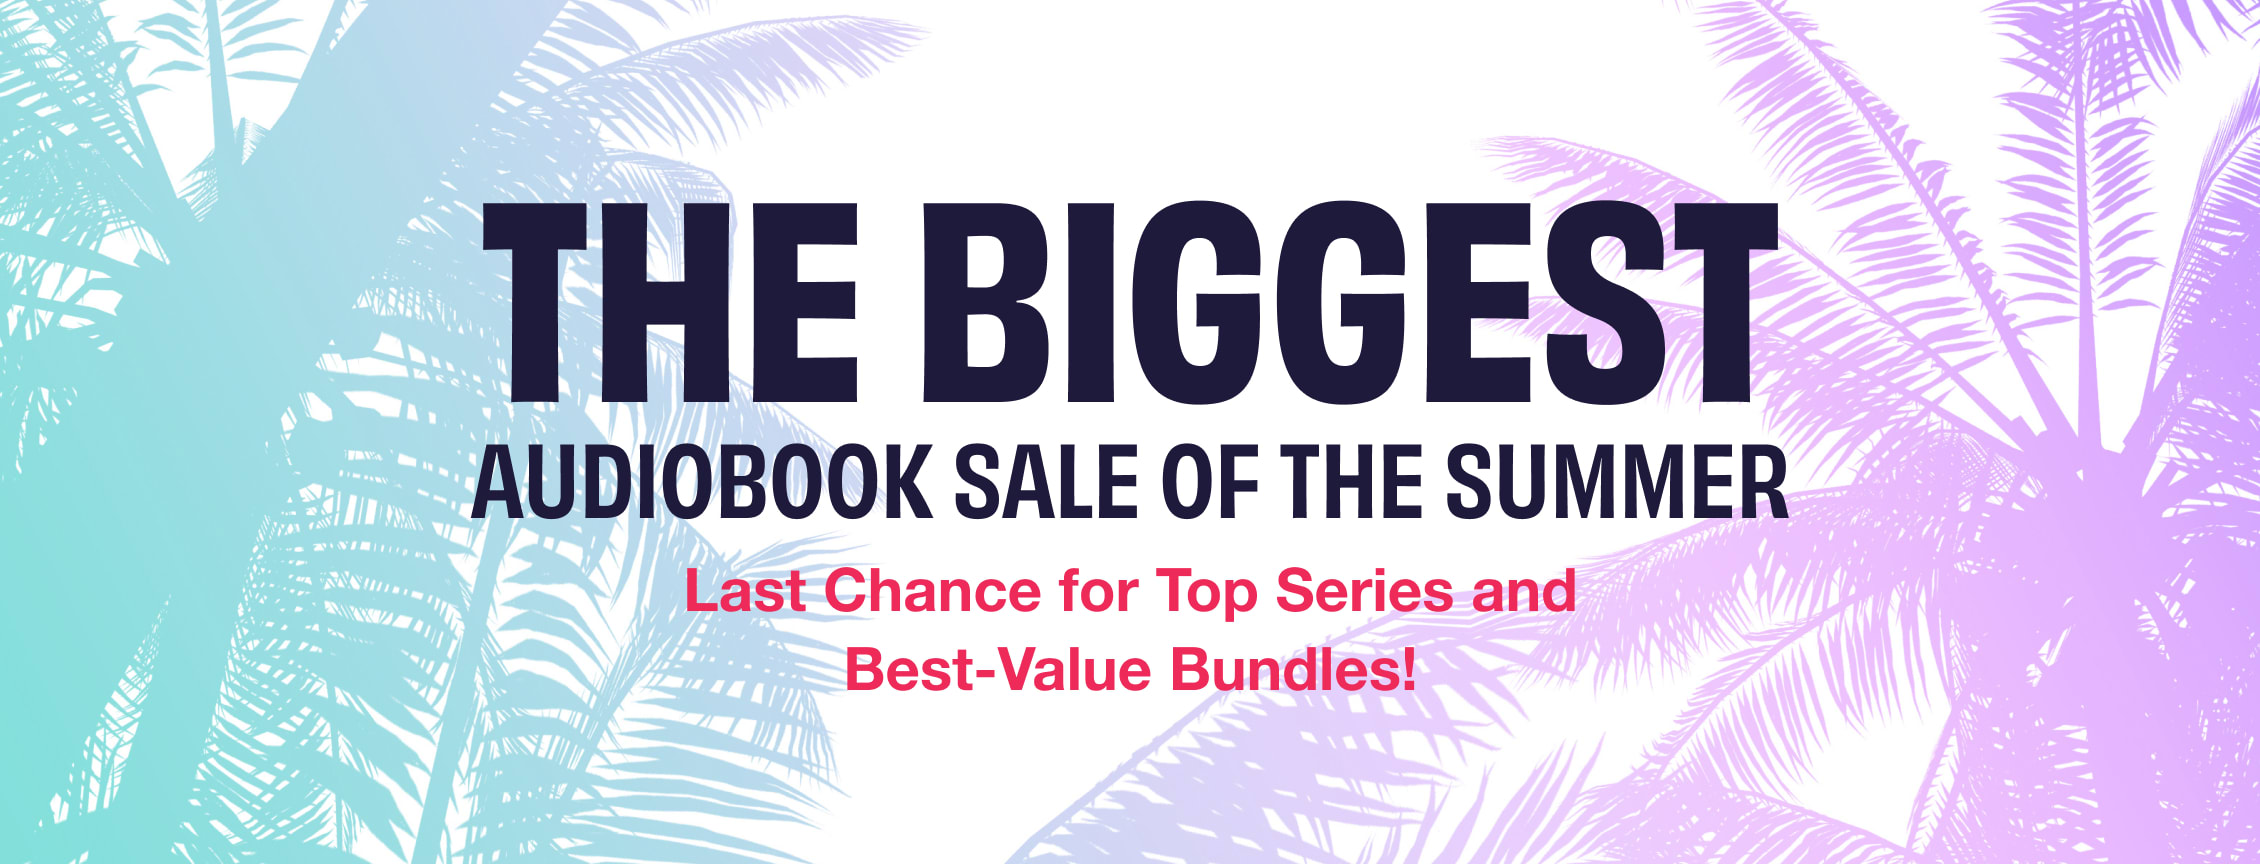 Massive Summer Sale on Top-Selling Series and Best-Value Bundles